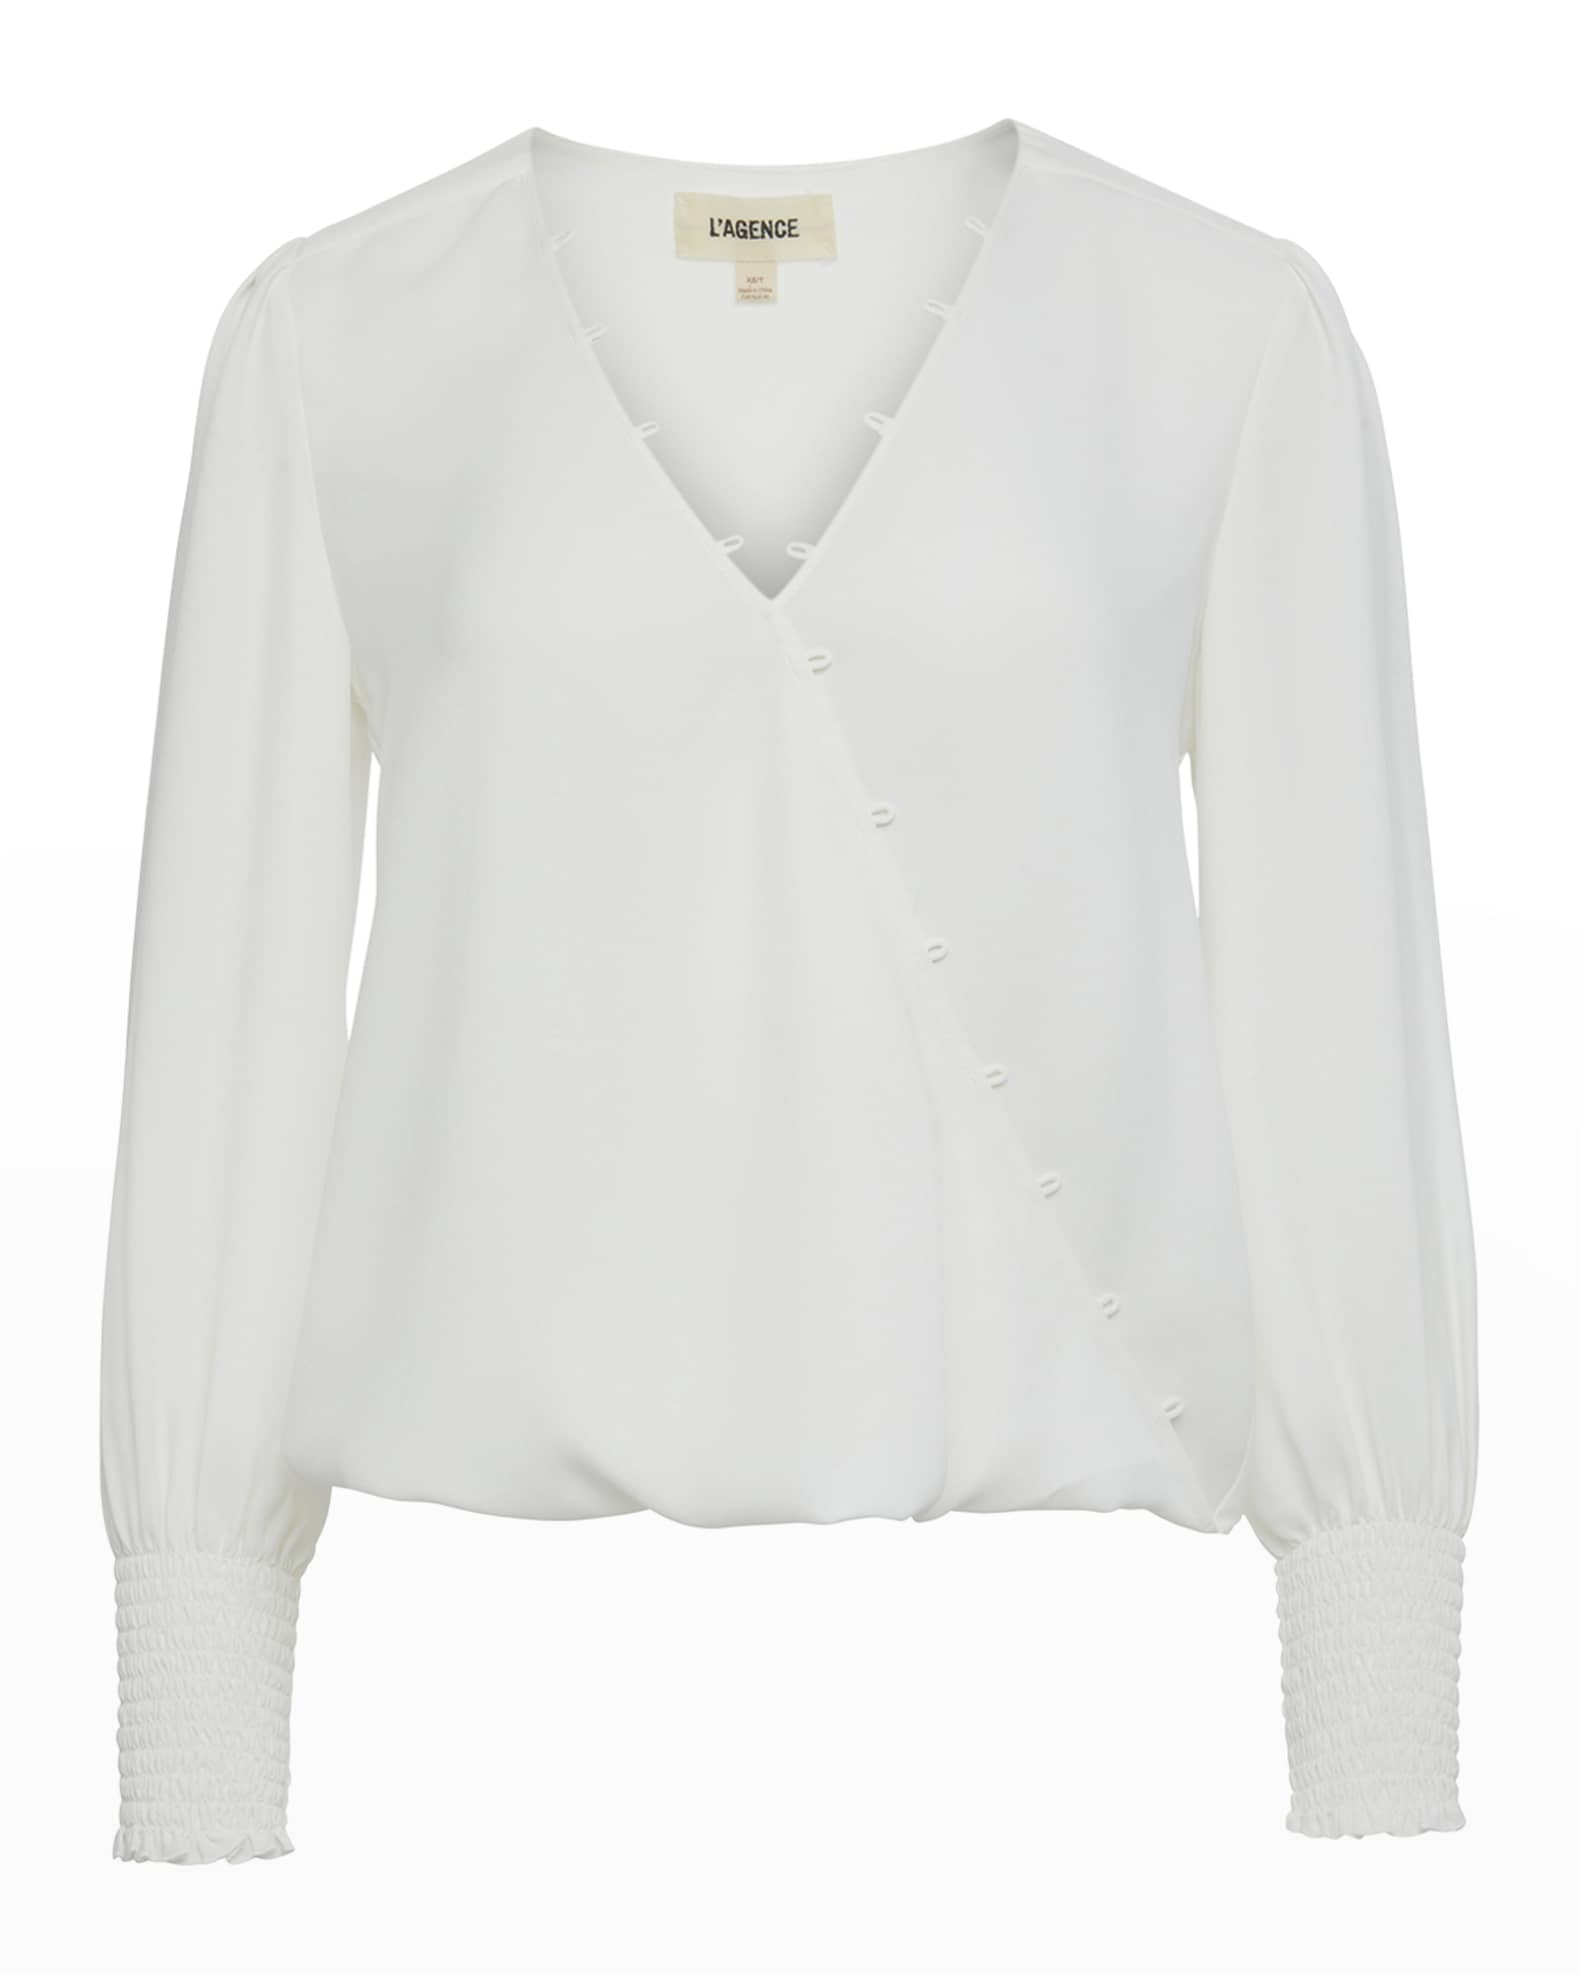 L'Agence Enzo Cross-Front Blouse | Neiman Marcus